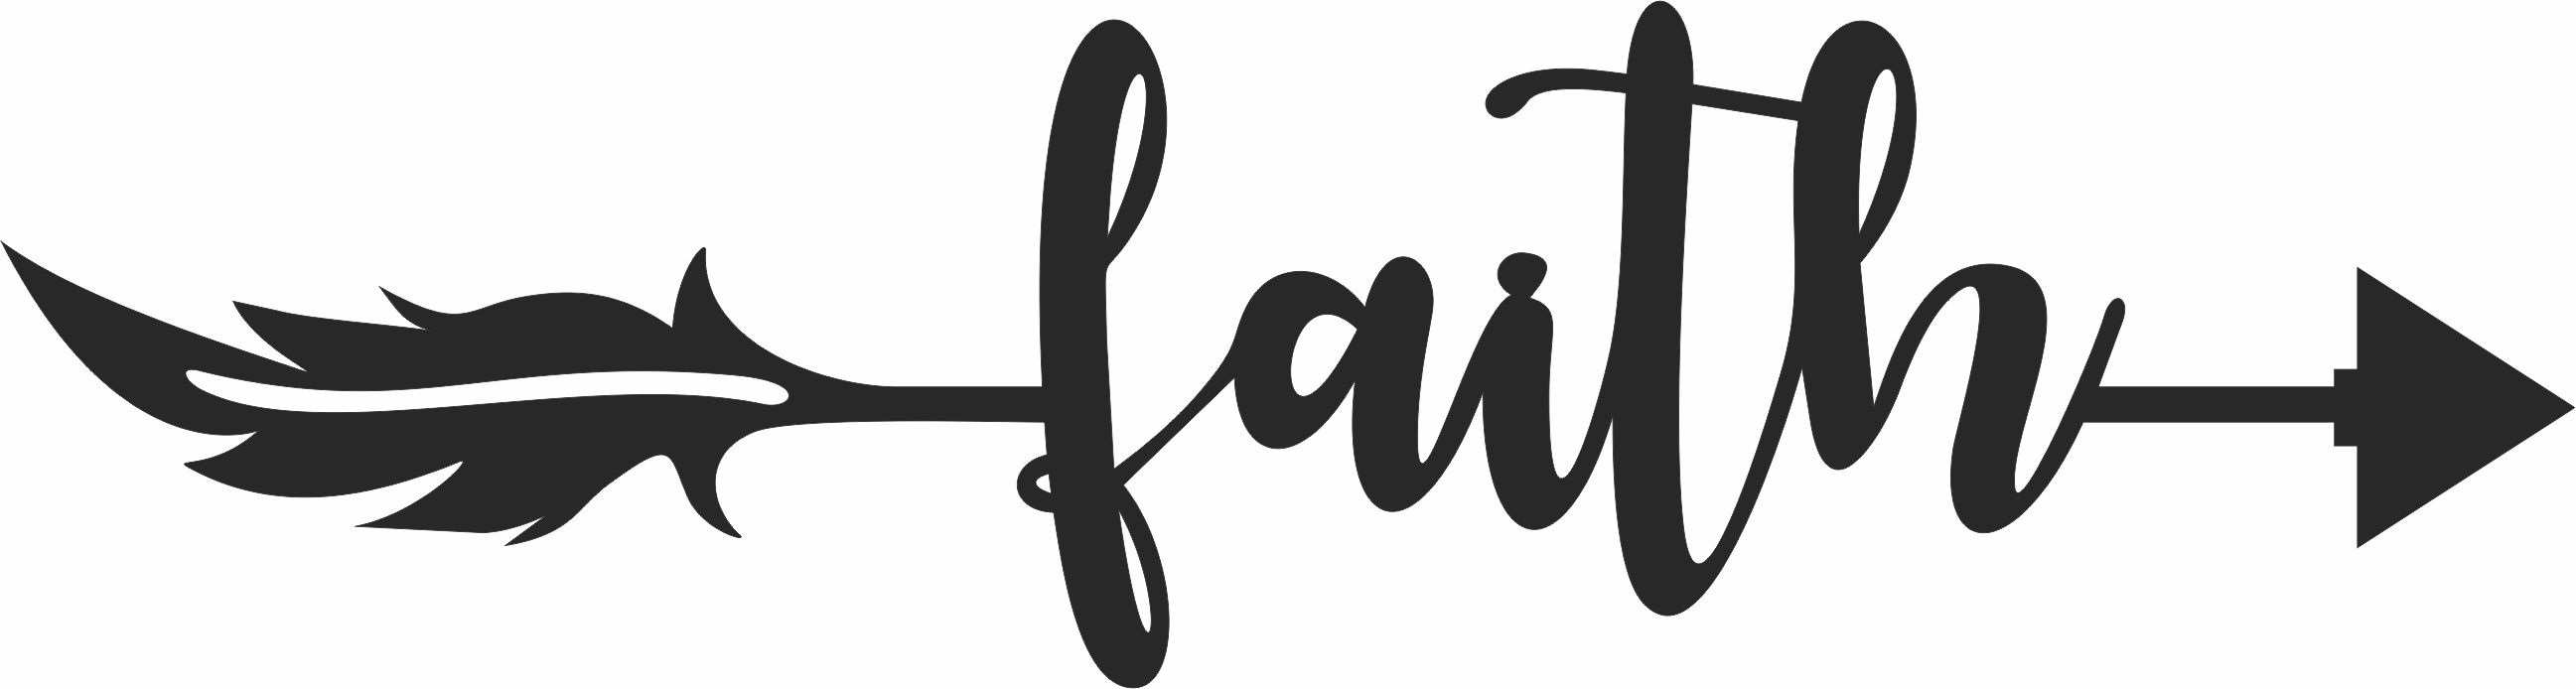 Faith arrow sign - For Laser Cut DXF CDR SVG Files - free download ...